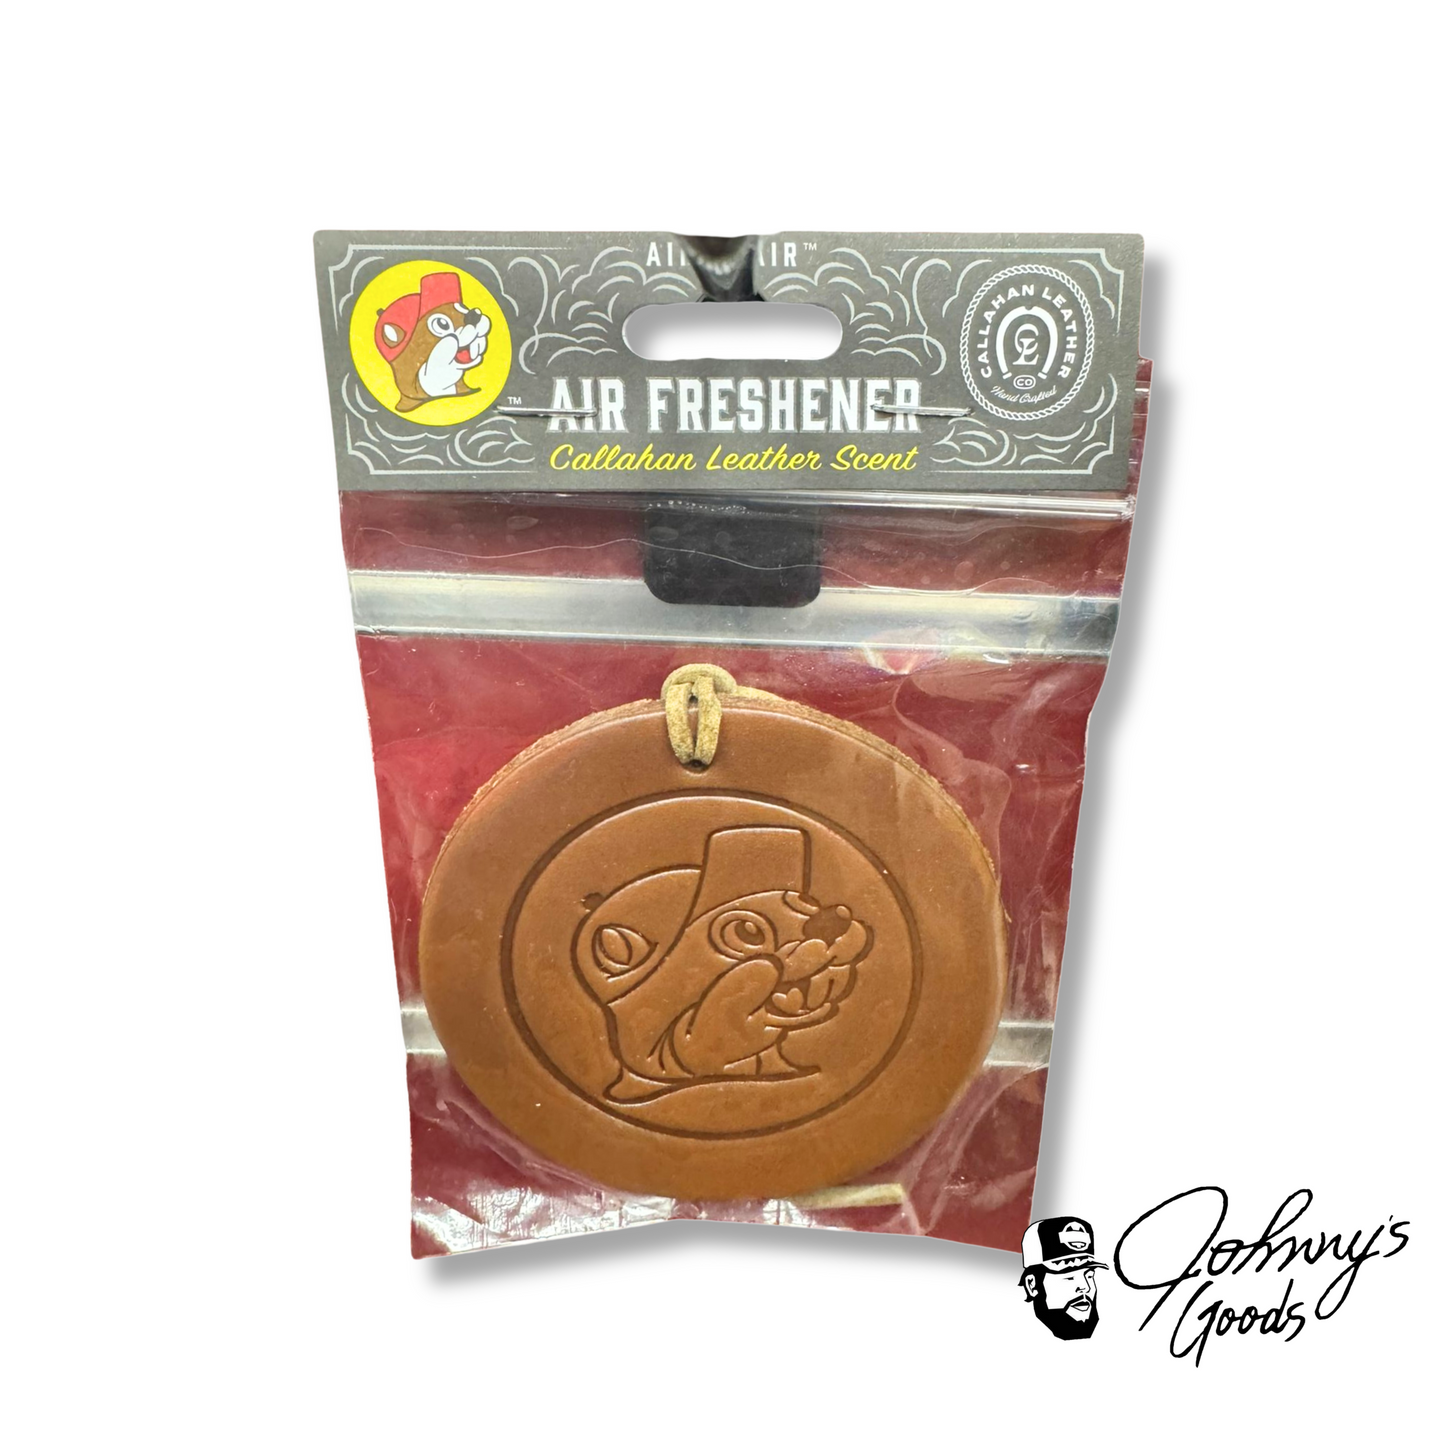 Buc-ee's Air Freshener Callahan Leather Scent